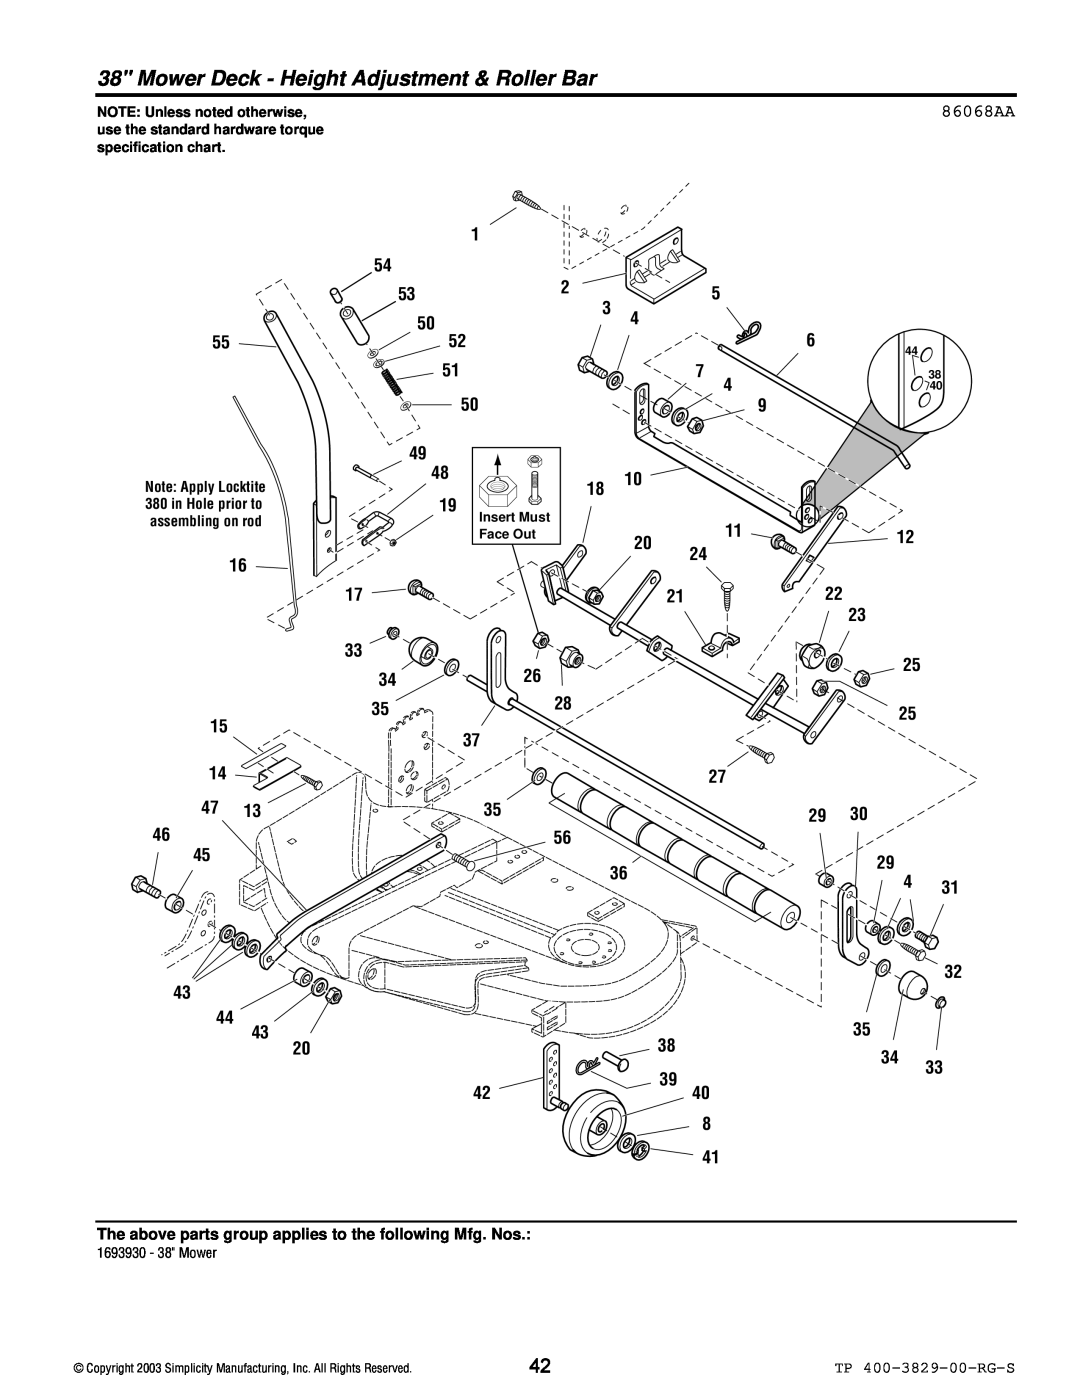 Simplicity 1693920 Mower Deck - Height Adjustment & Roller Bar, 86068AA, TP 400-3829-00-RG-S, NOTE Unless noted otherwise 